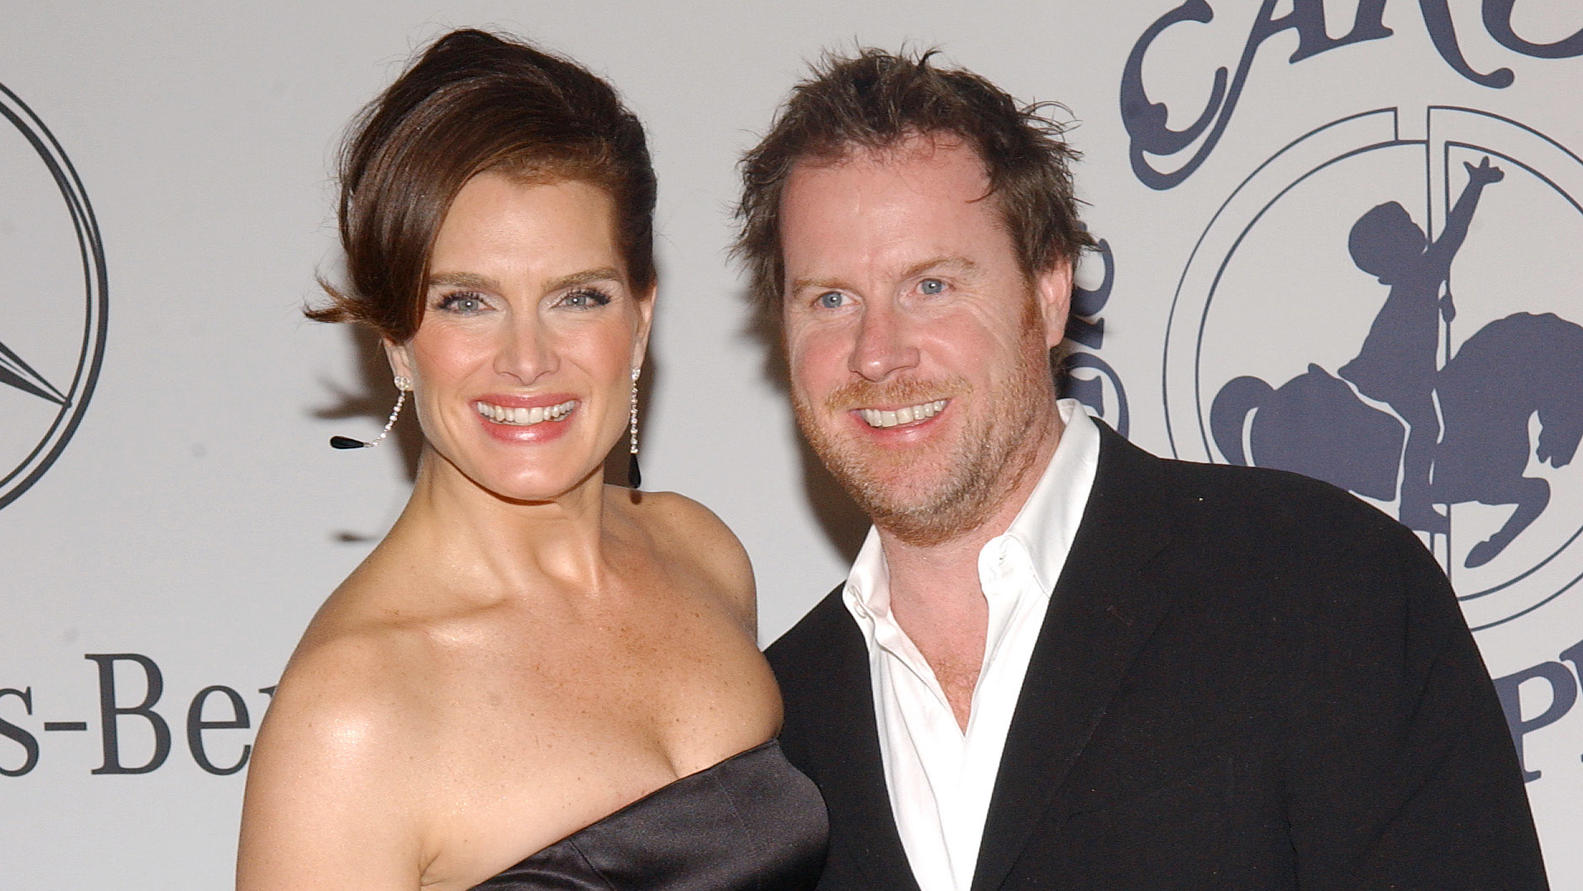 Brooke Shields and husband Chris Henchy attend the 17th Mercedes-Benz Carousel of Hope Ball at the Beverly Hilton Hotel. Los Angeles, October 28, 2006. Photo by Lionel Hahn +++(c) dpa - Report+++